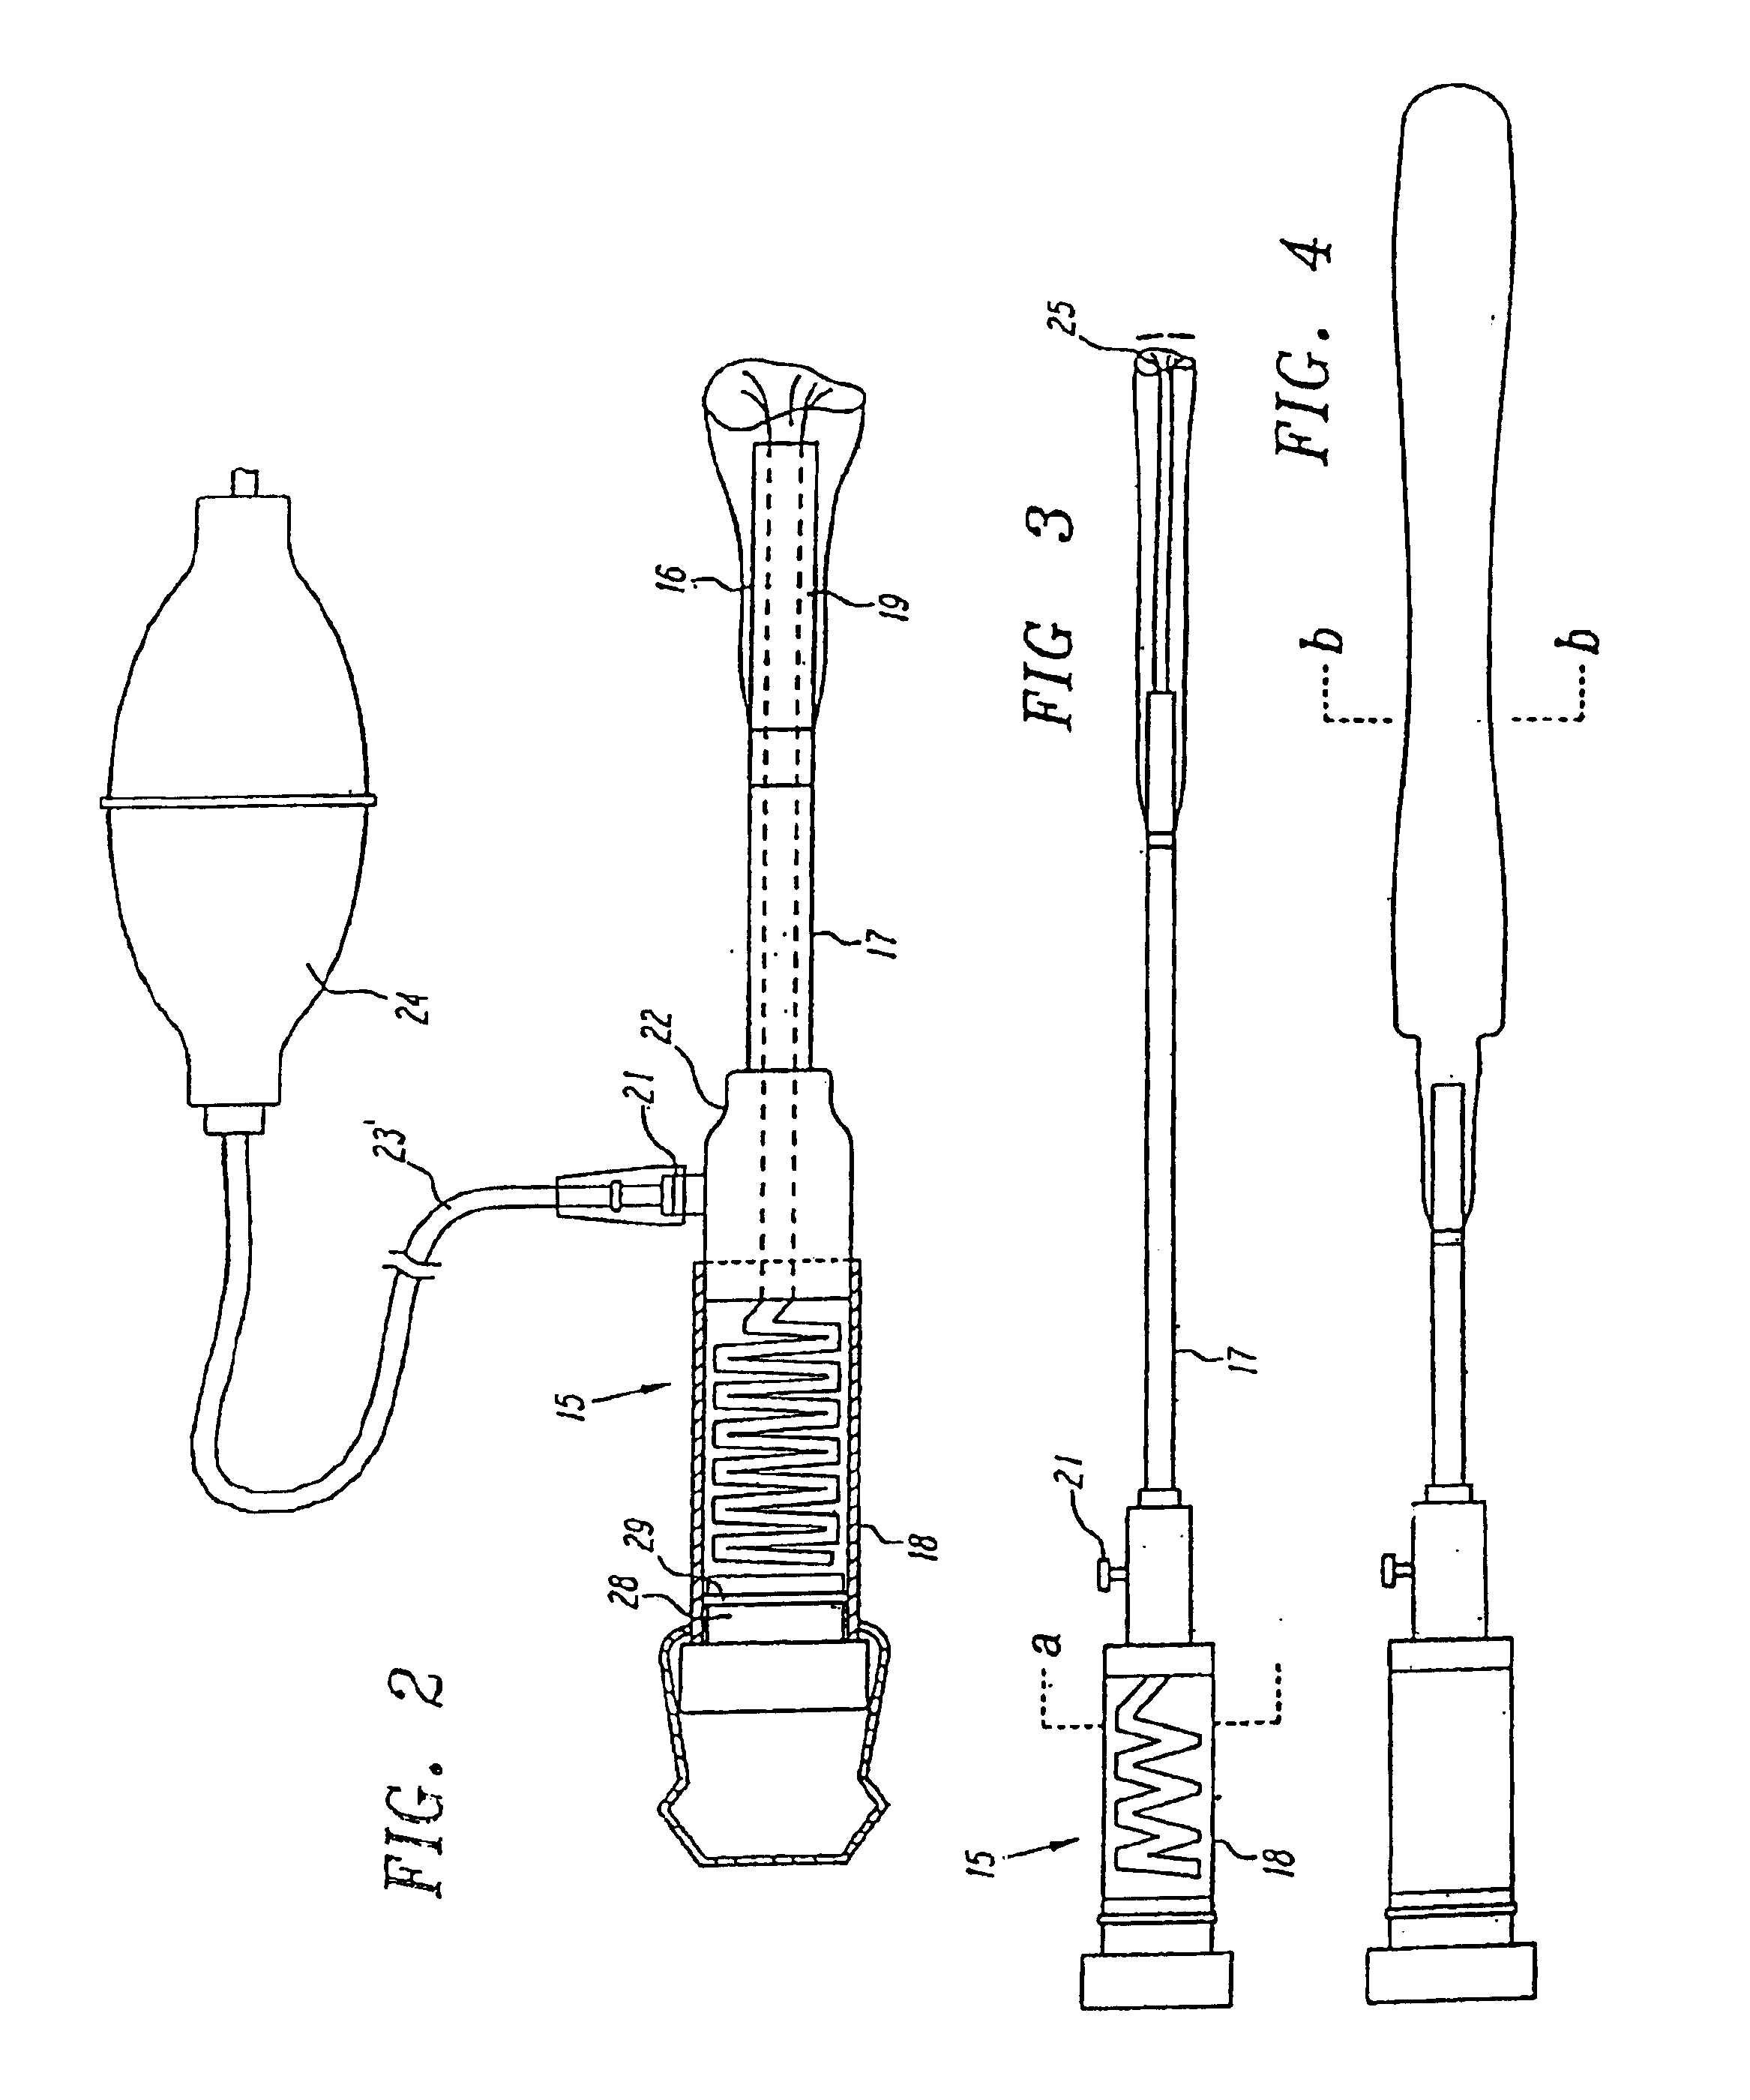 Methods and devices for blood vessel harvesting